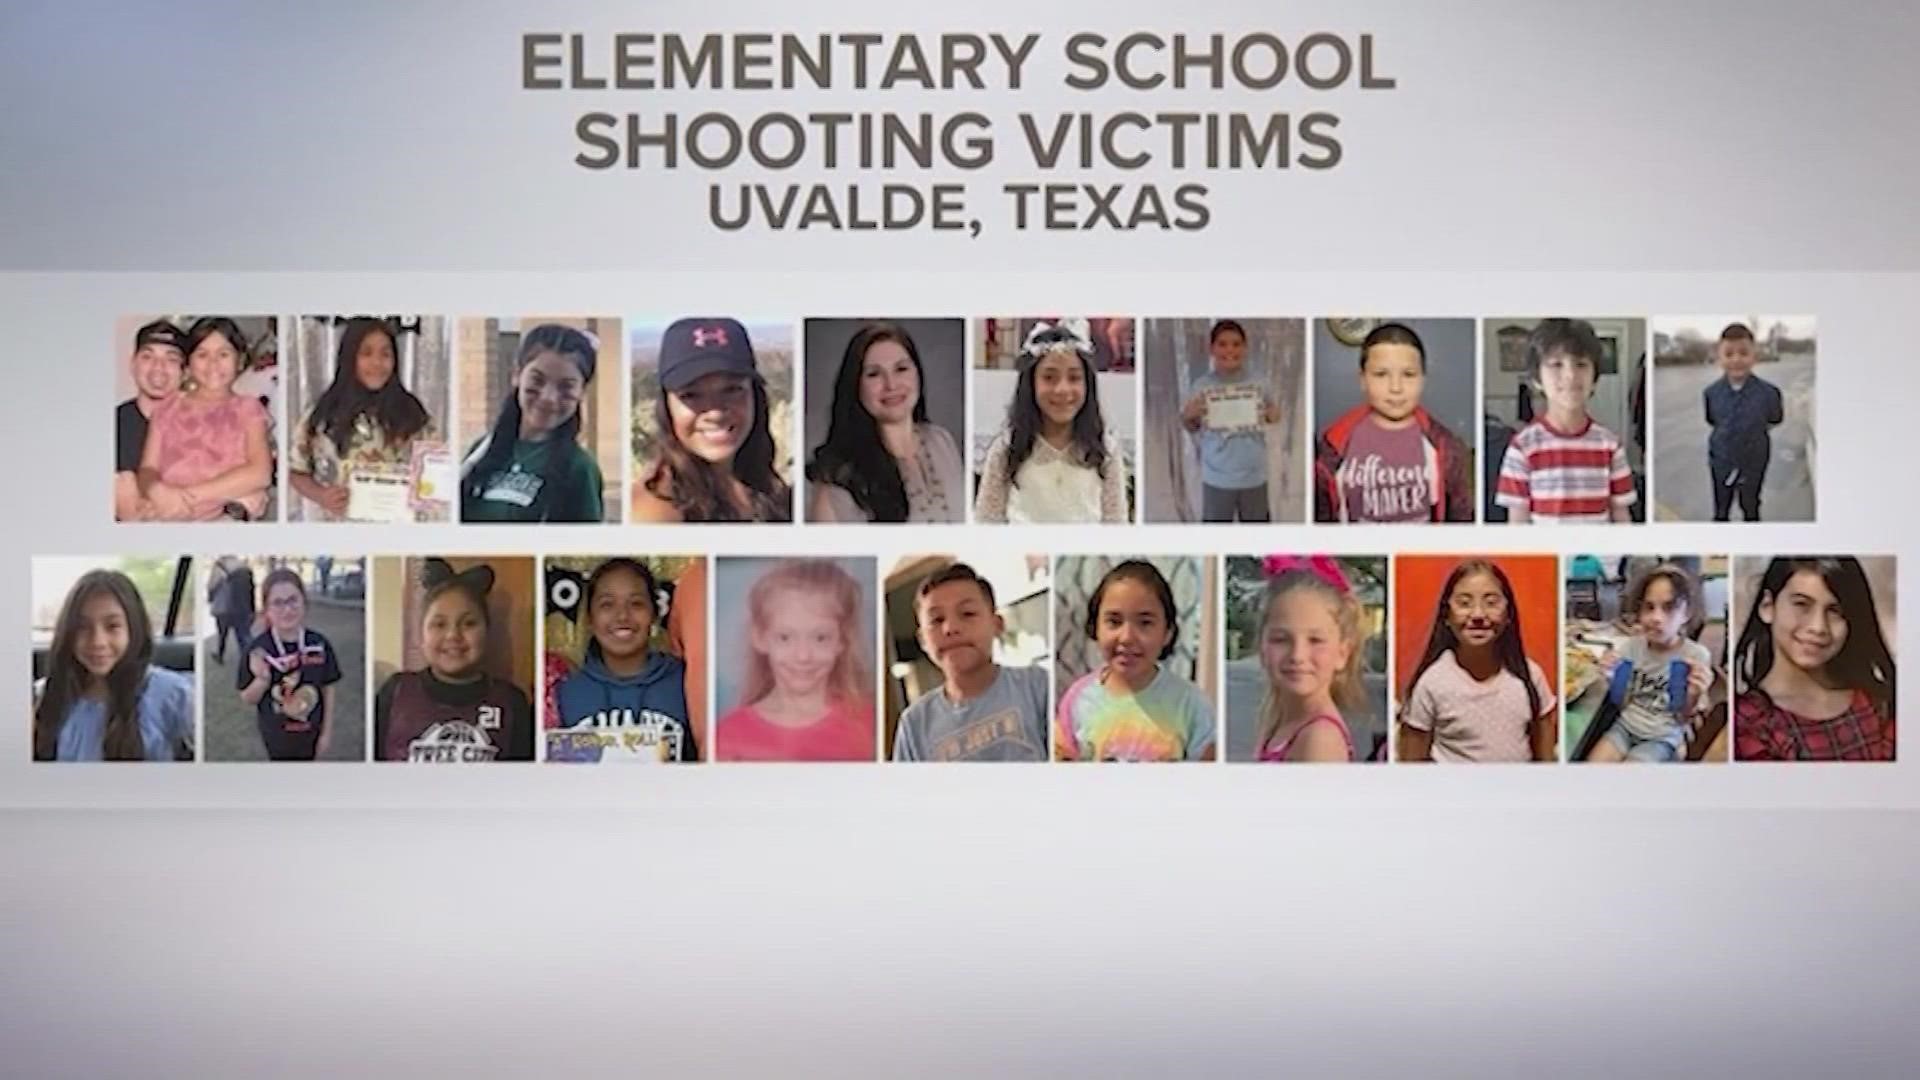 The Uvalde community has waited weeks for any answers from officials, and they hope the report scheduled to be released on Sunday will give them some.